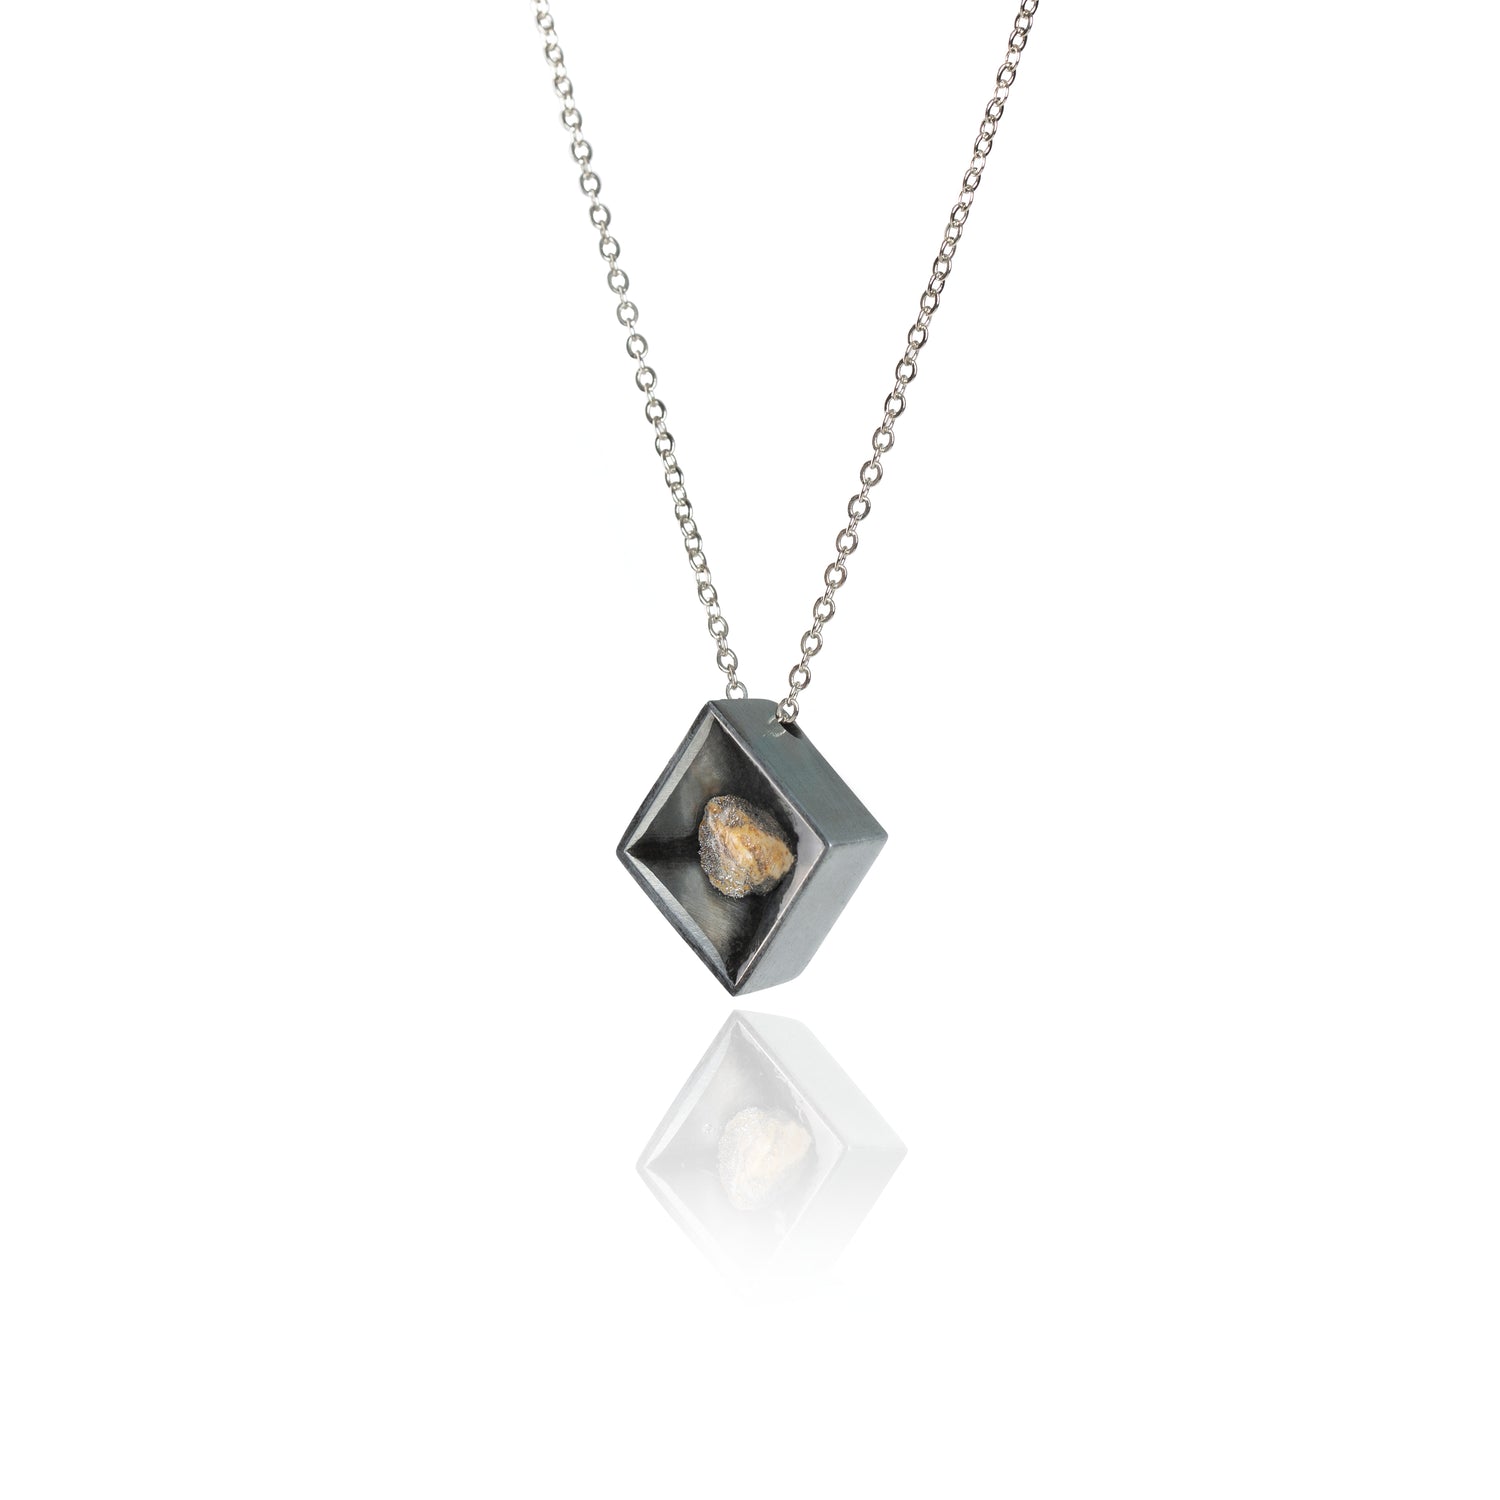 A side view of a small natural multicolored stone sitting in the middle of a diamond shaped metal pendant in a dark silver color. The pendant is hanging on silver chain.